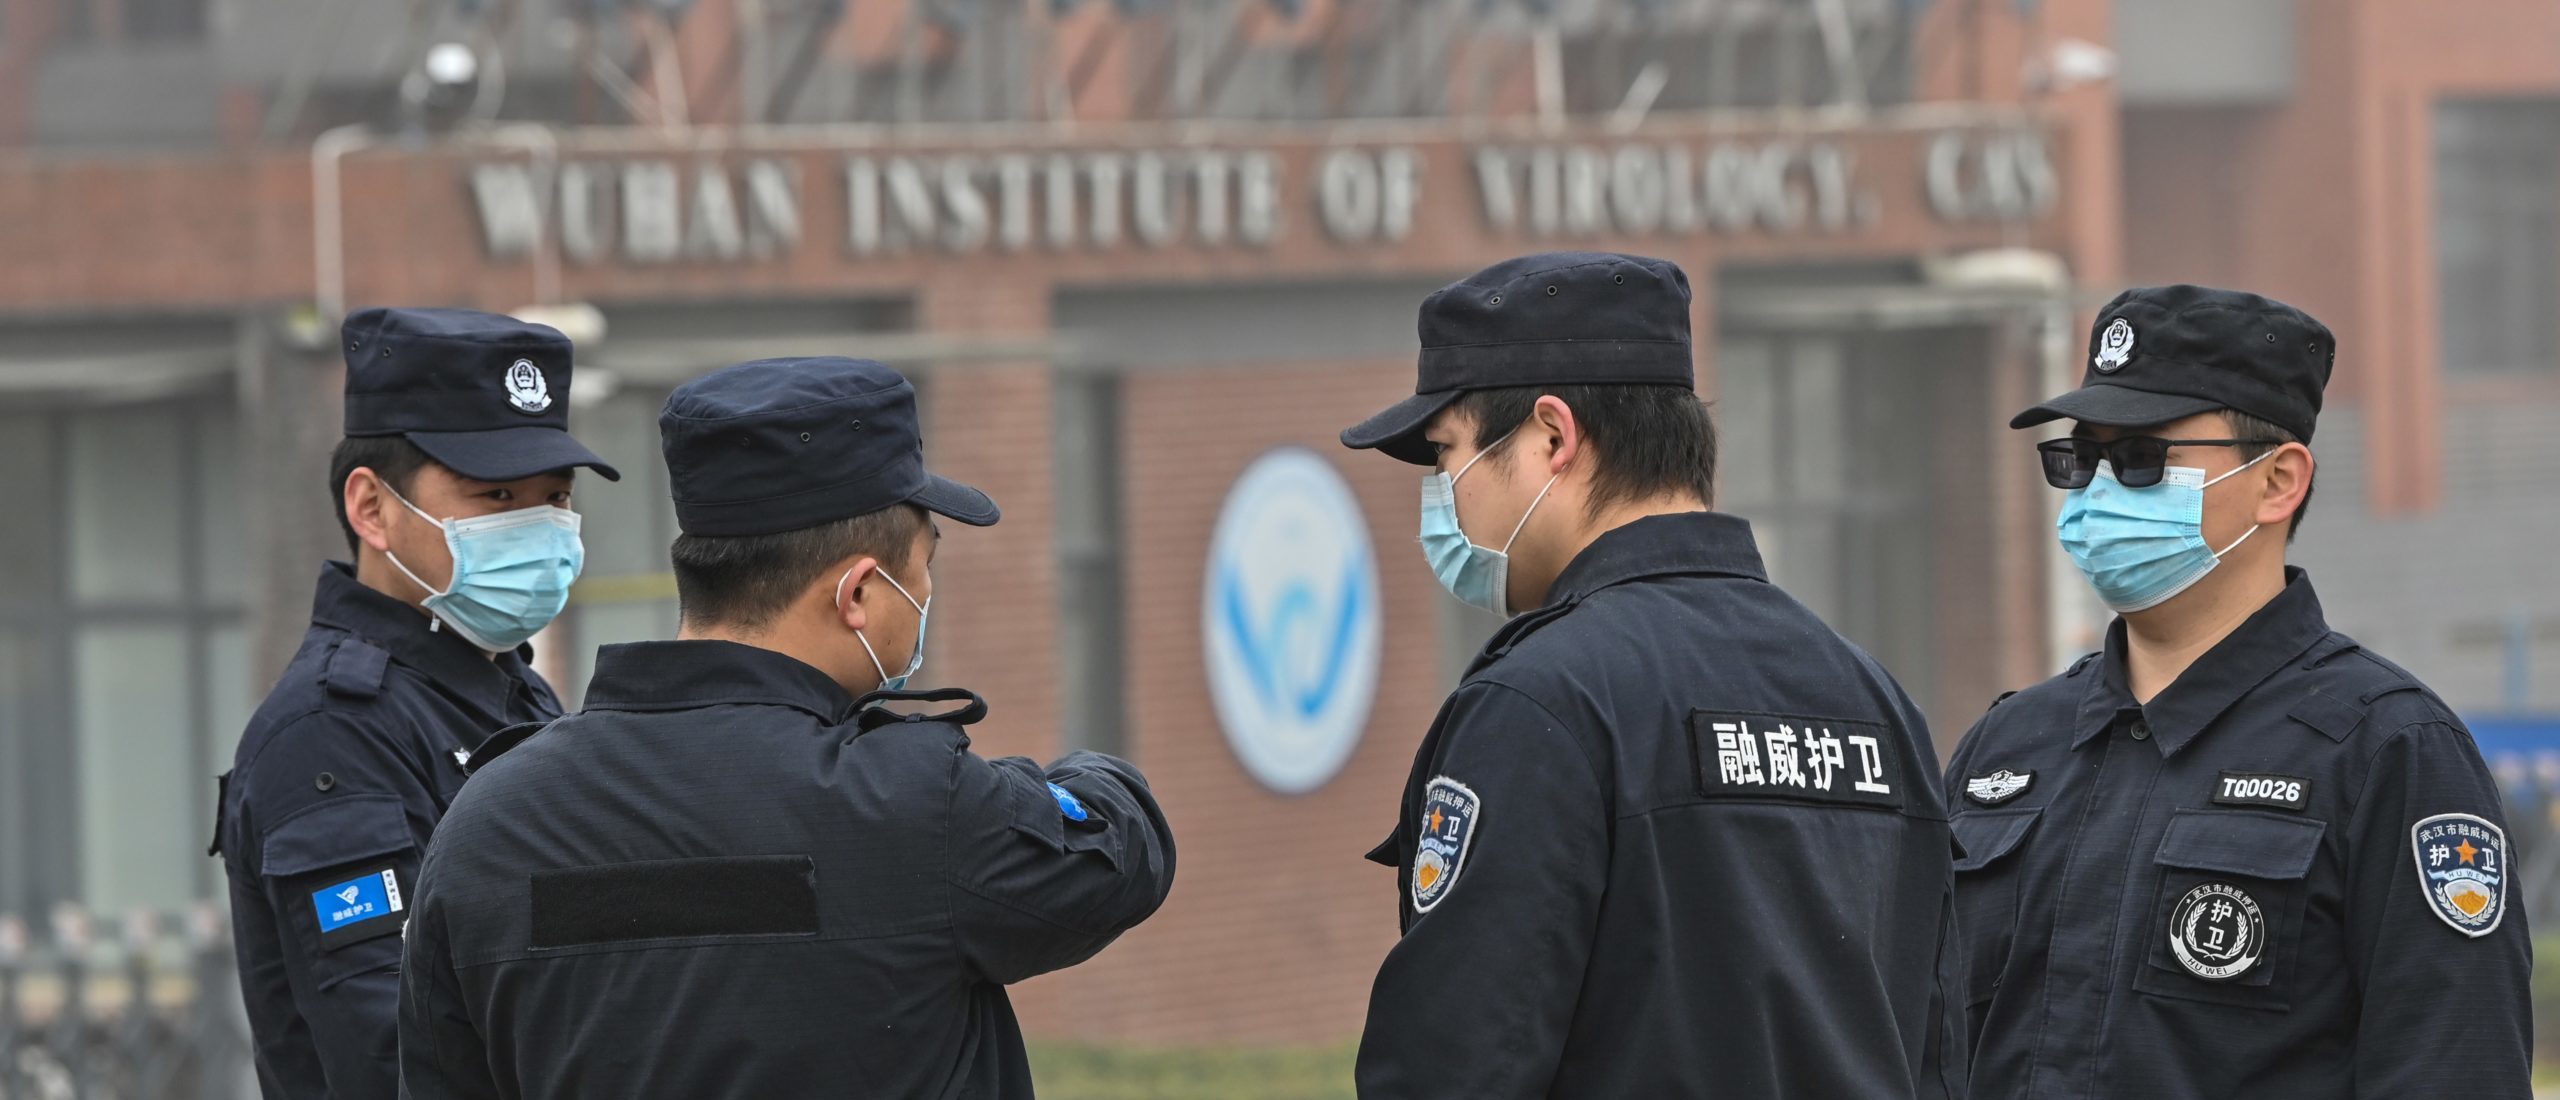 Security personnel stand guard outside the Wuhan Institute of Virology in Wuhan as members of the World Health Organization (WHO) team investigating the origins of the COVID-19 coronavirus make a visit. (Photo by HECTOR RETAMAL/AFP via Getty Images)